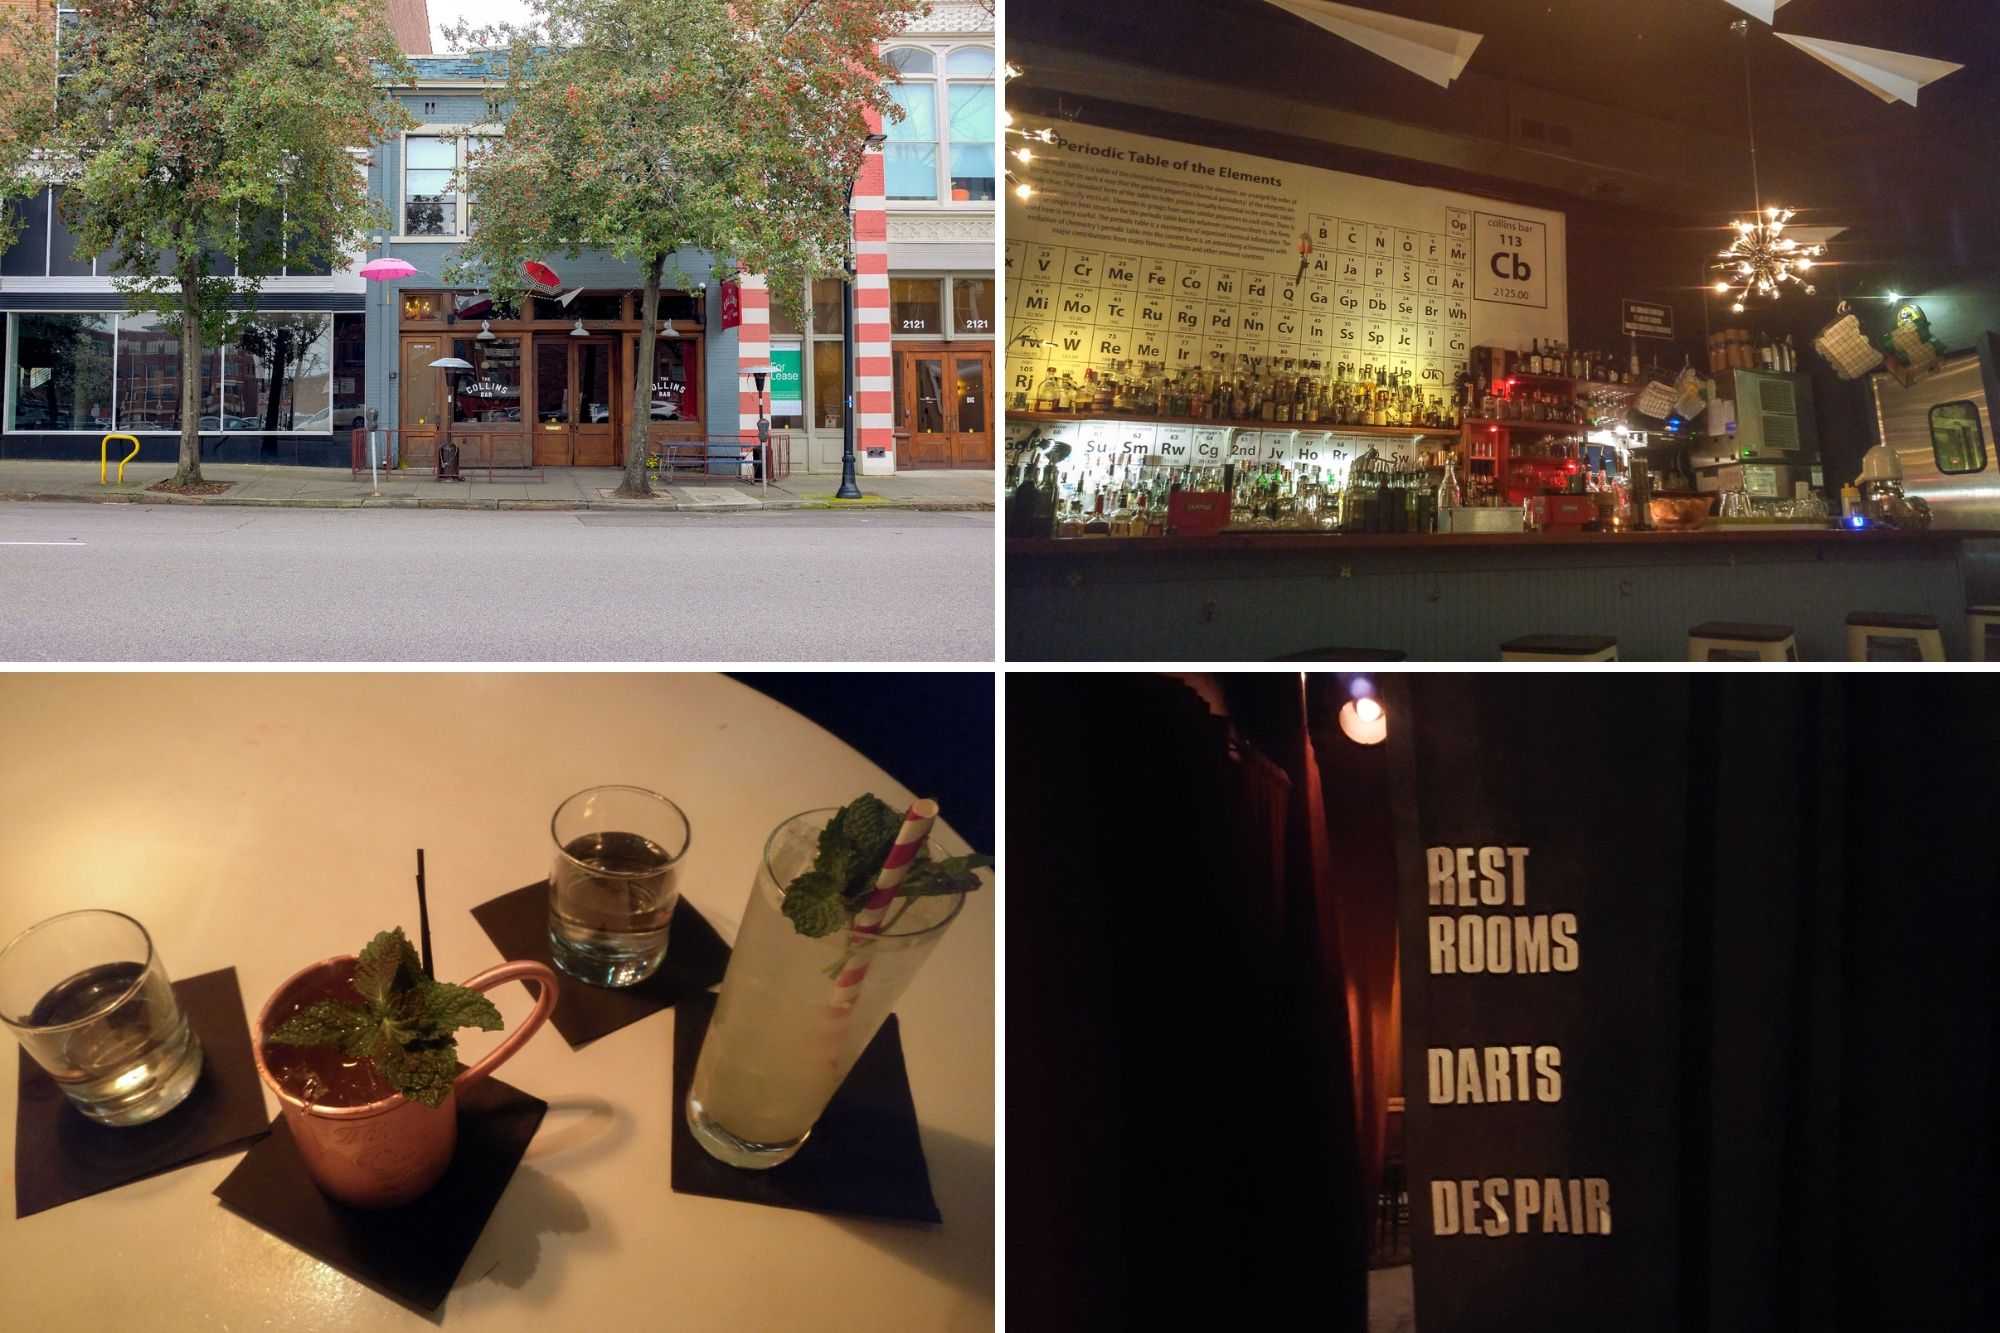 collage at collins bar: exterior, interior, drinks, and signs for restroom